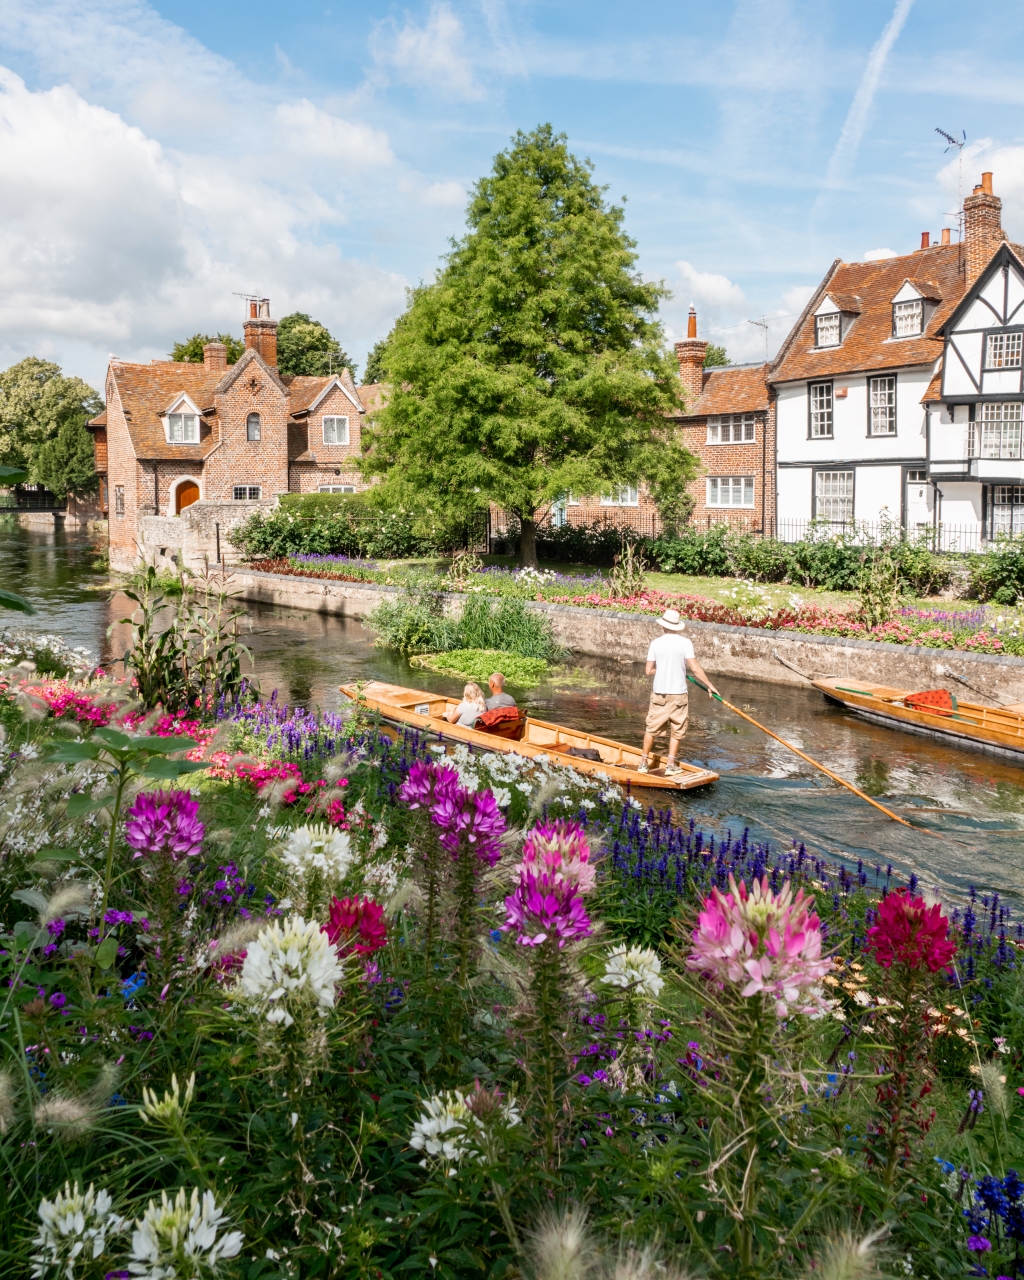 The Ultimate Guide to a Weekend Away in Kent